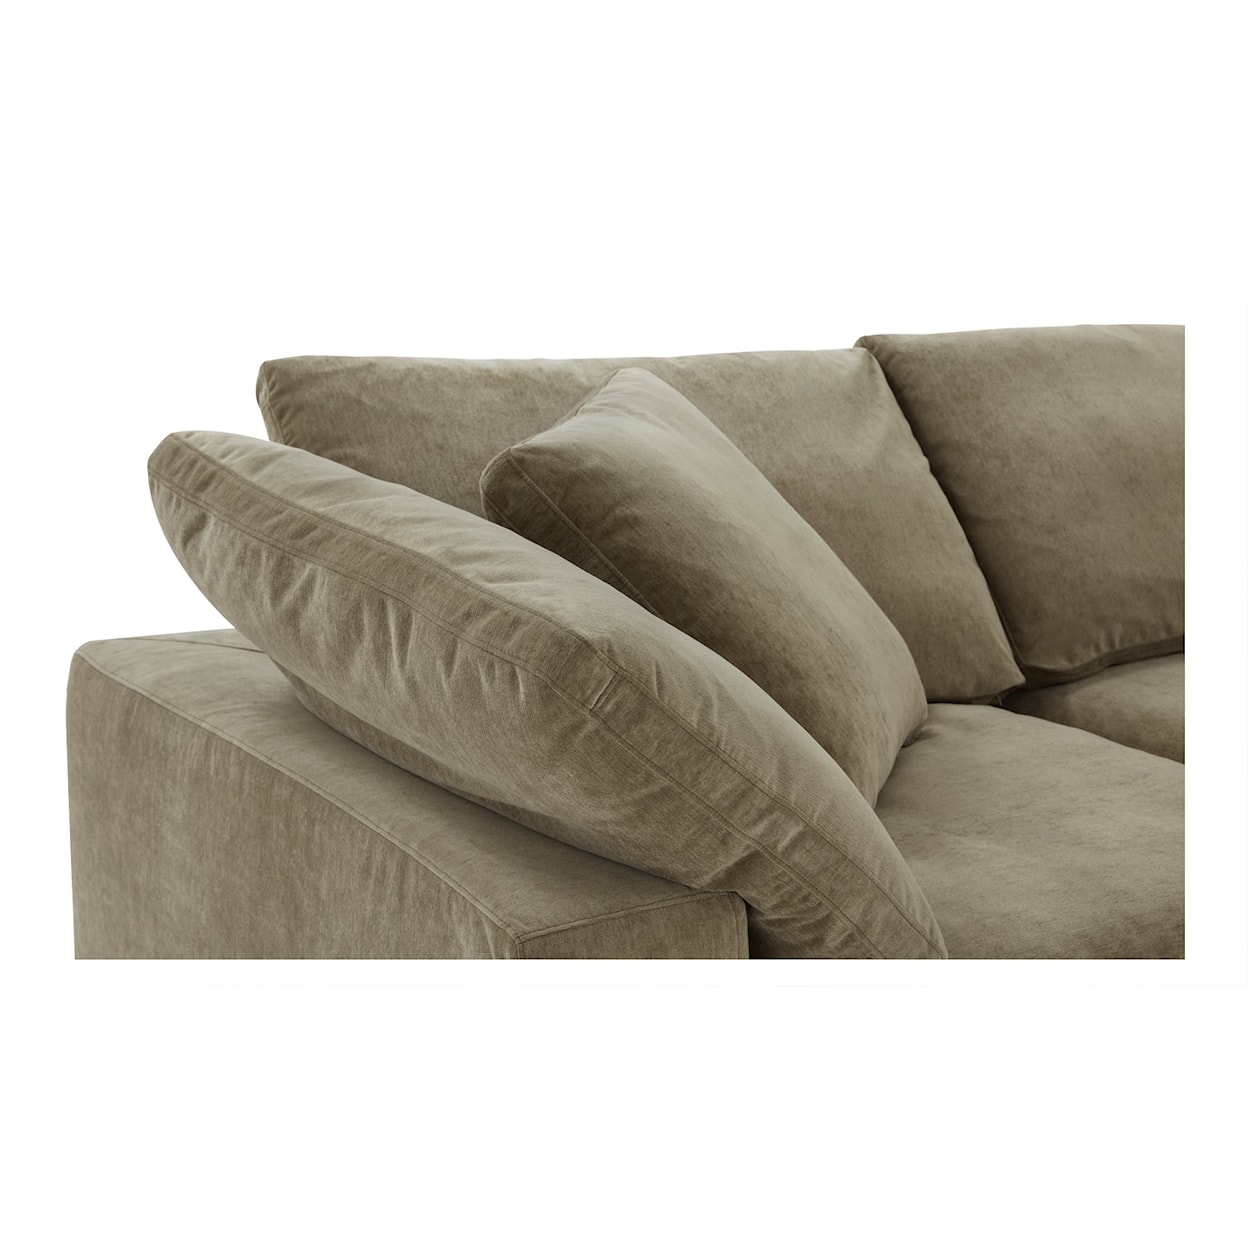 Moe's Home Collection Terra Classic Sectional Sofa